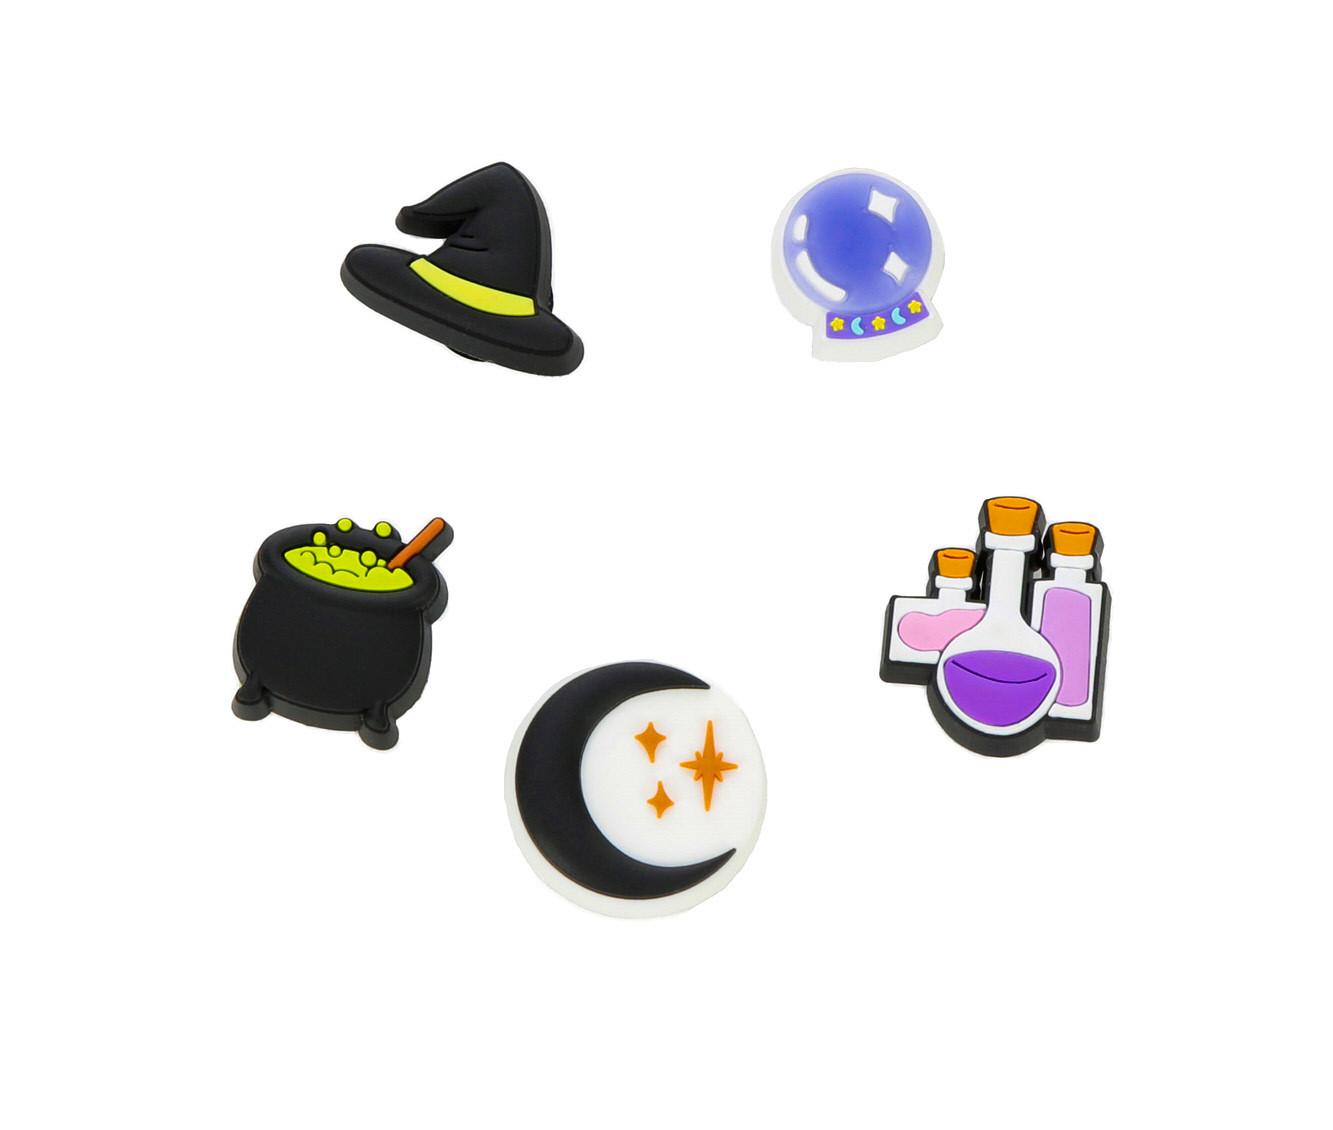 New Witchy Themed Shoe Charms For Your Crocs, Croc Compatible